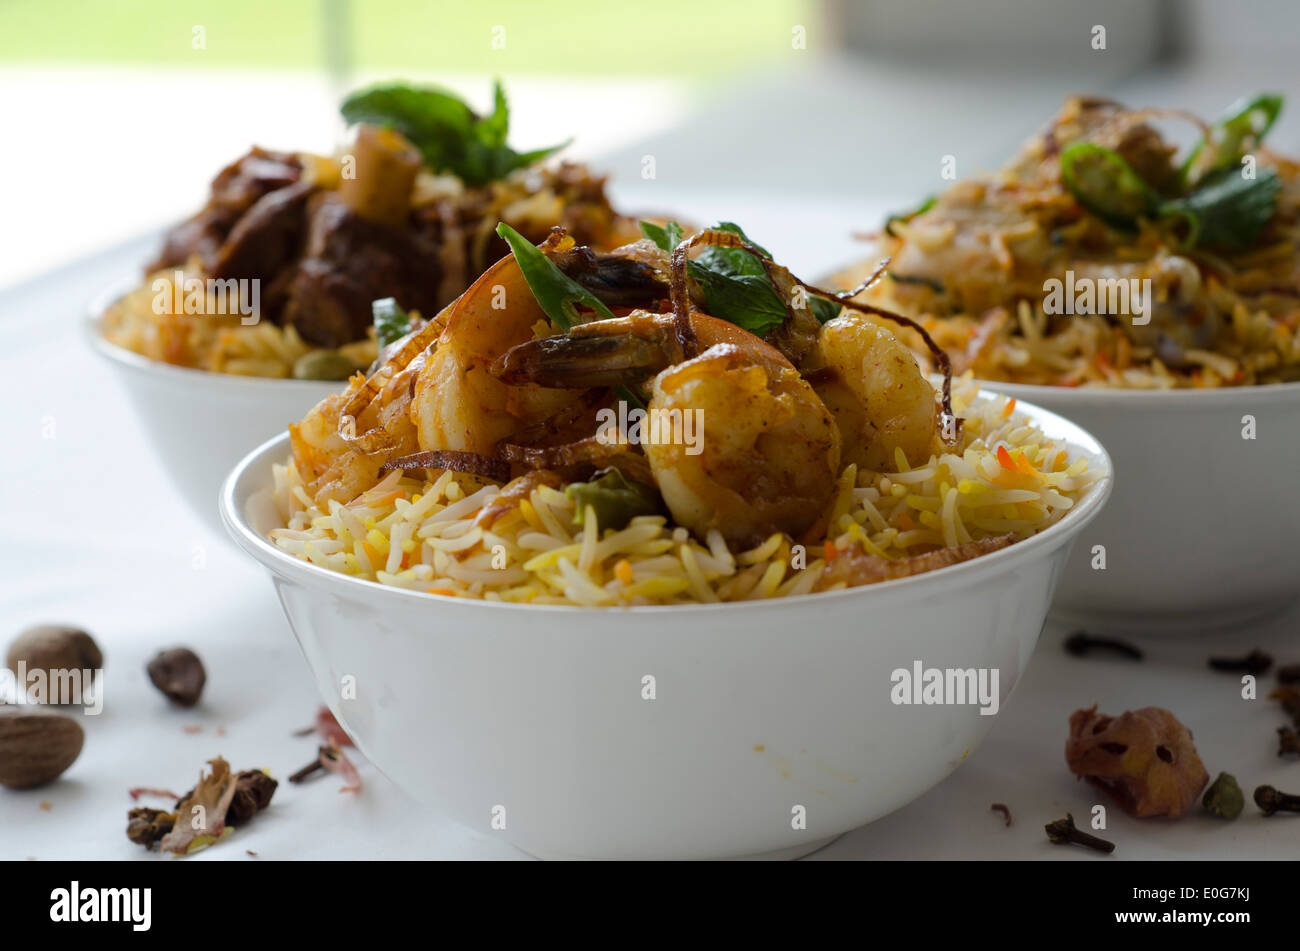 Biryani, a dish made by slow cooking fragrant rice with herbs and spices alongside, vegetables, meats or seafood.  Stock Photo